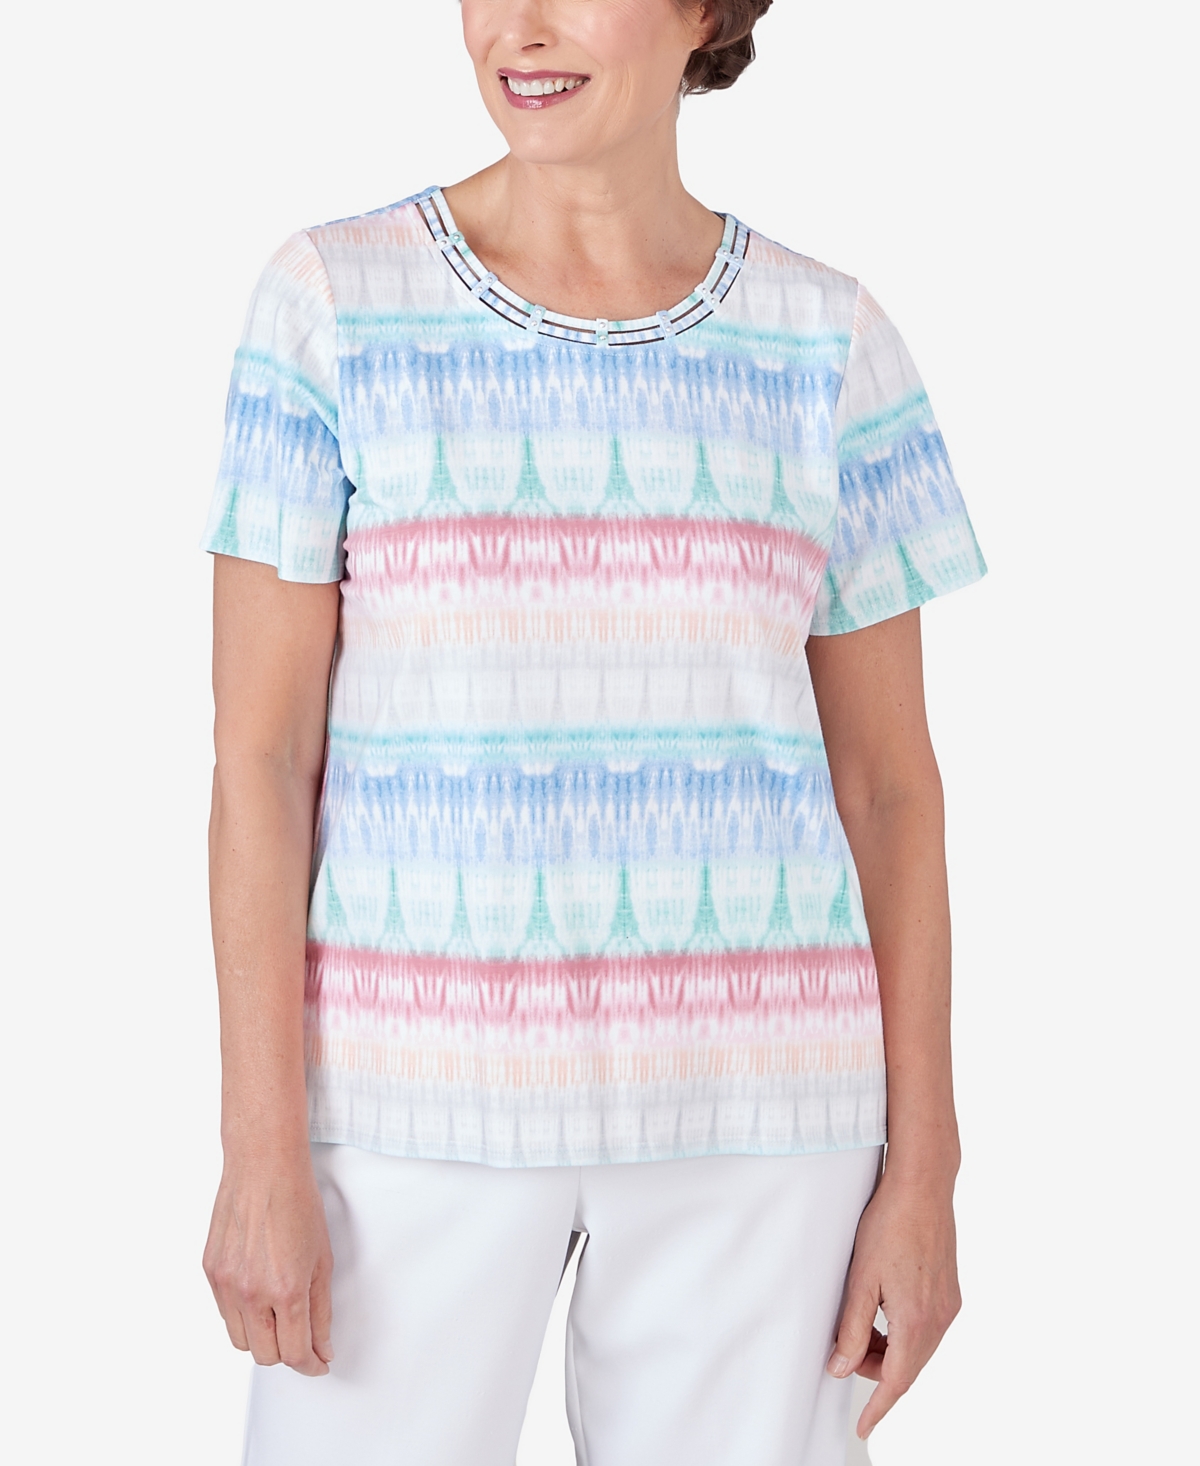 Women's Biadere Double Strap Short Sleeve Tee - Pastel